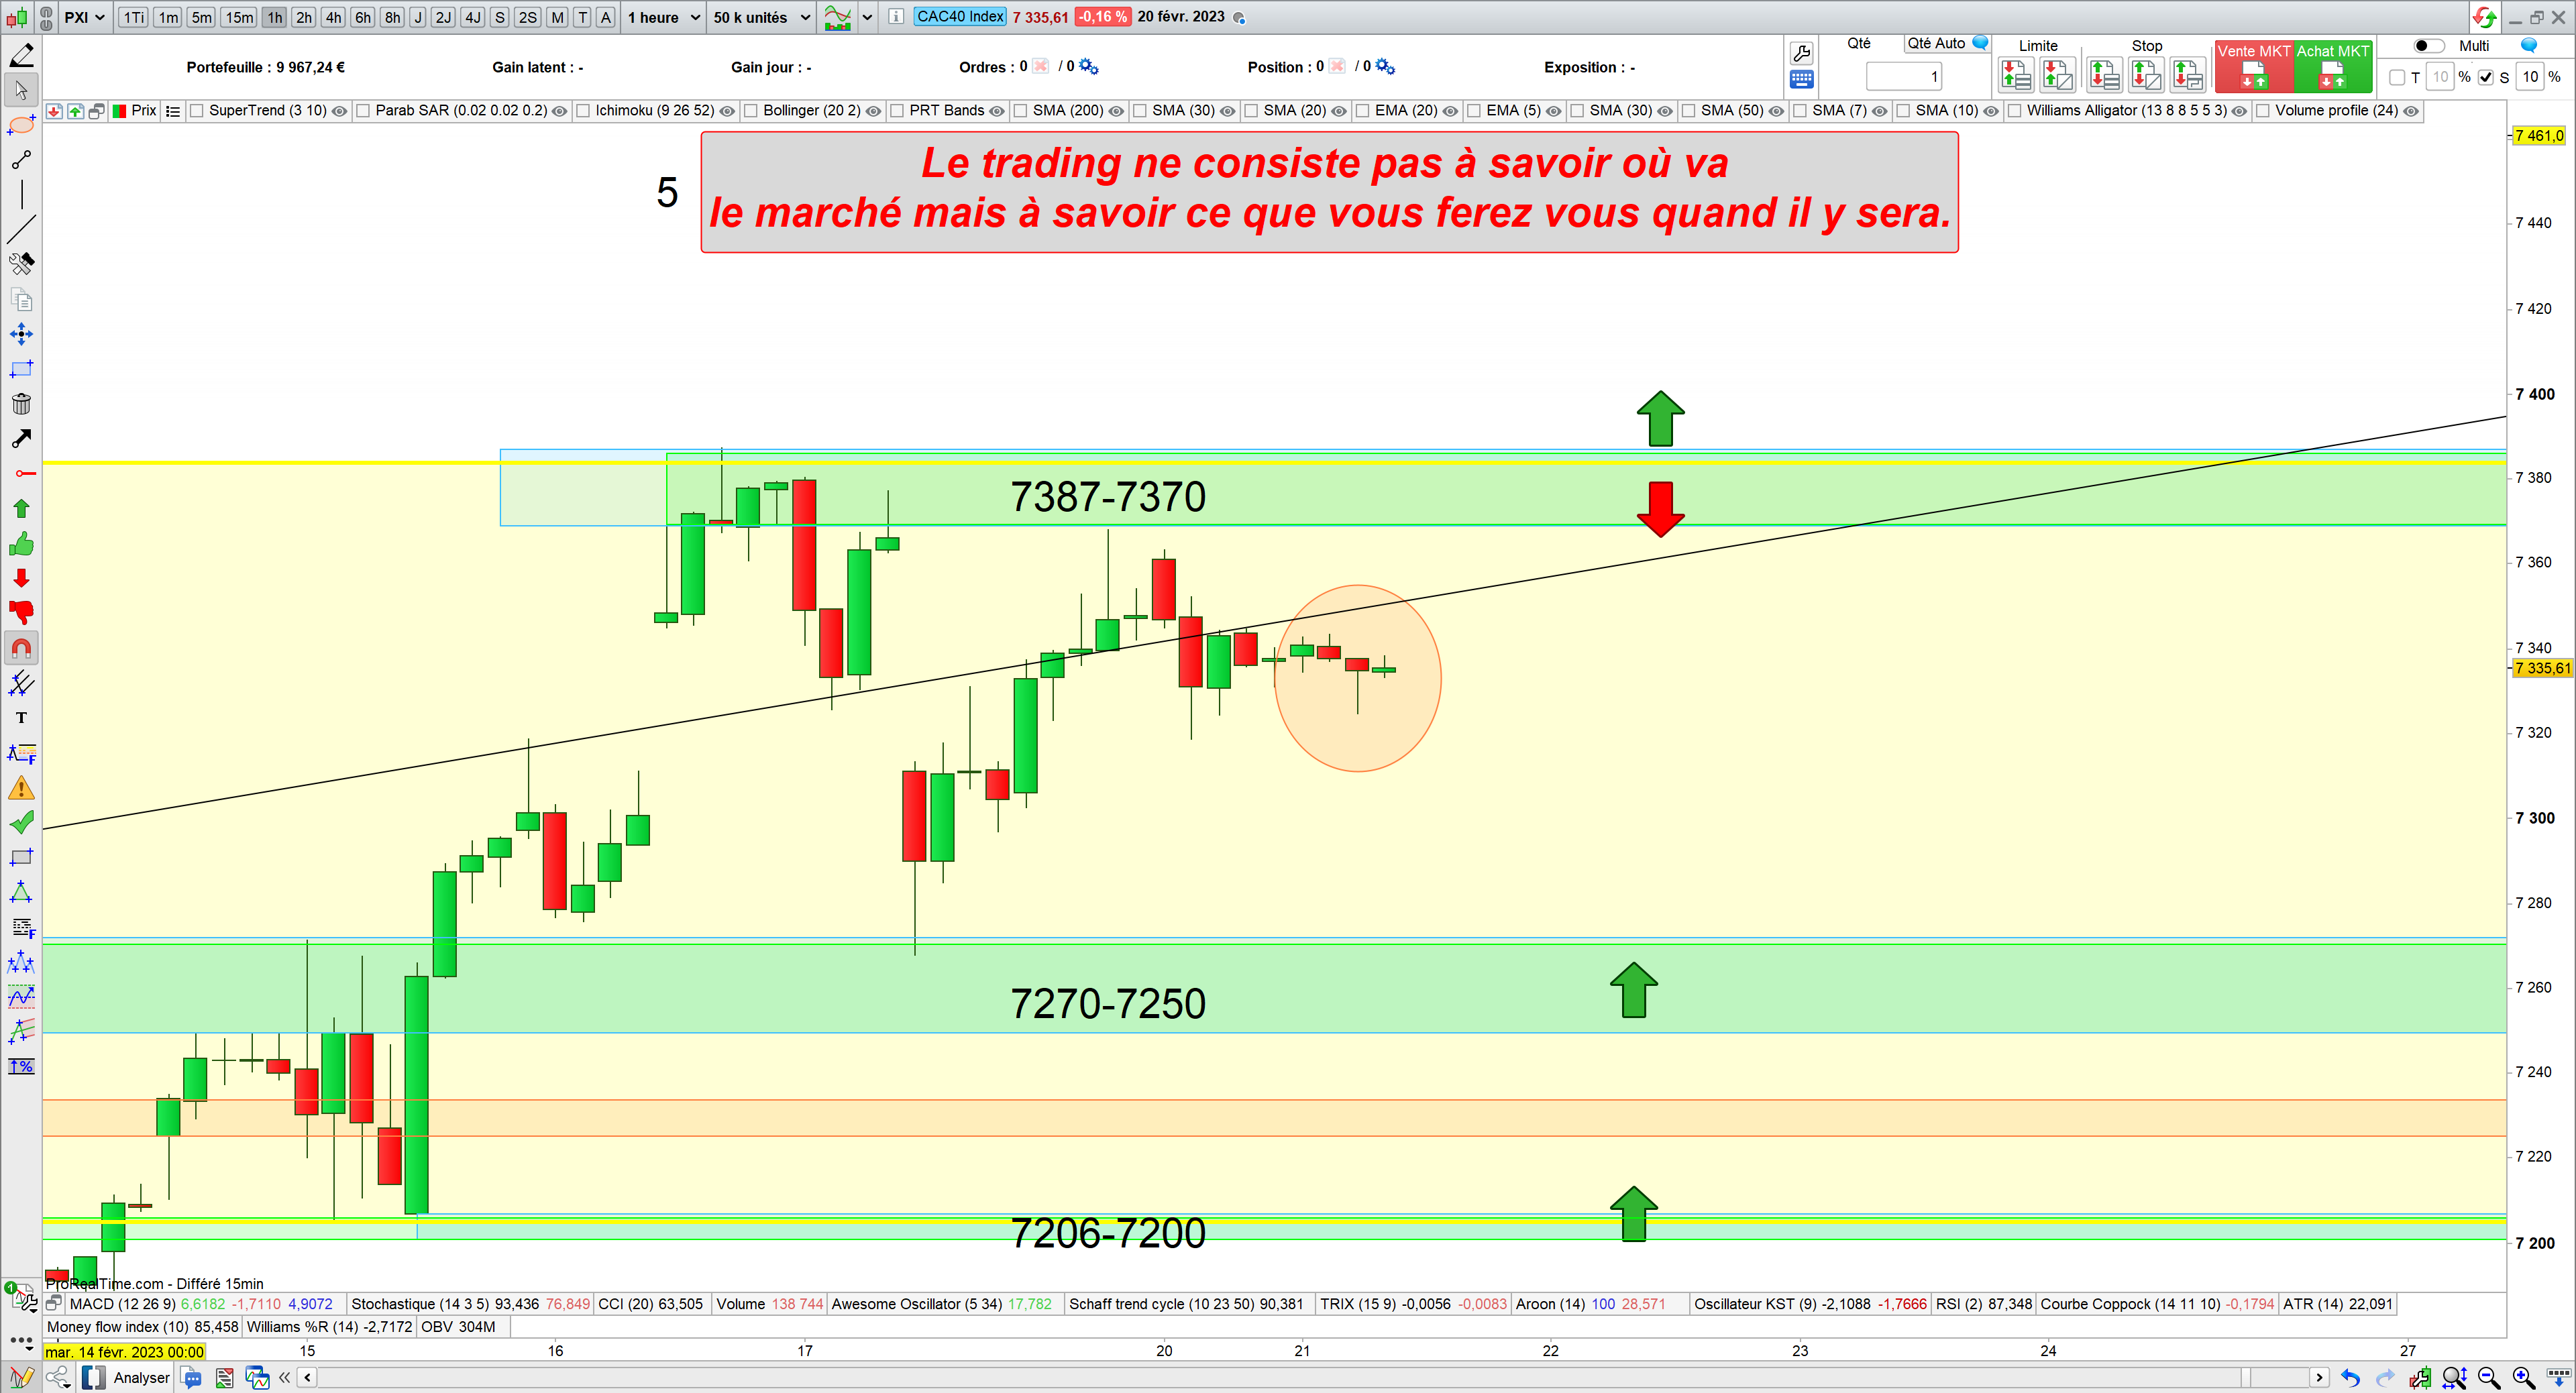 Trading cac40 21/02/23